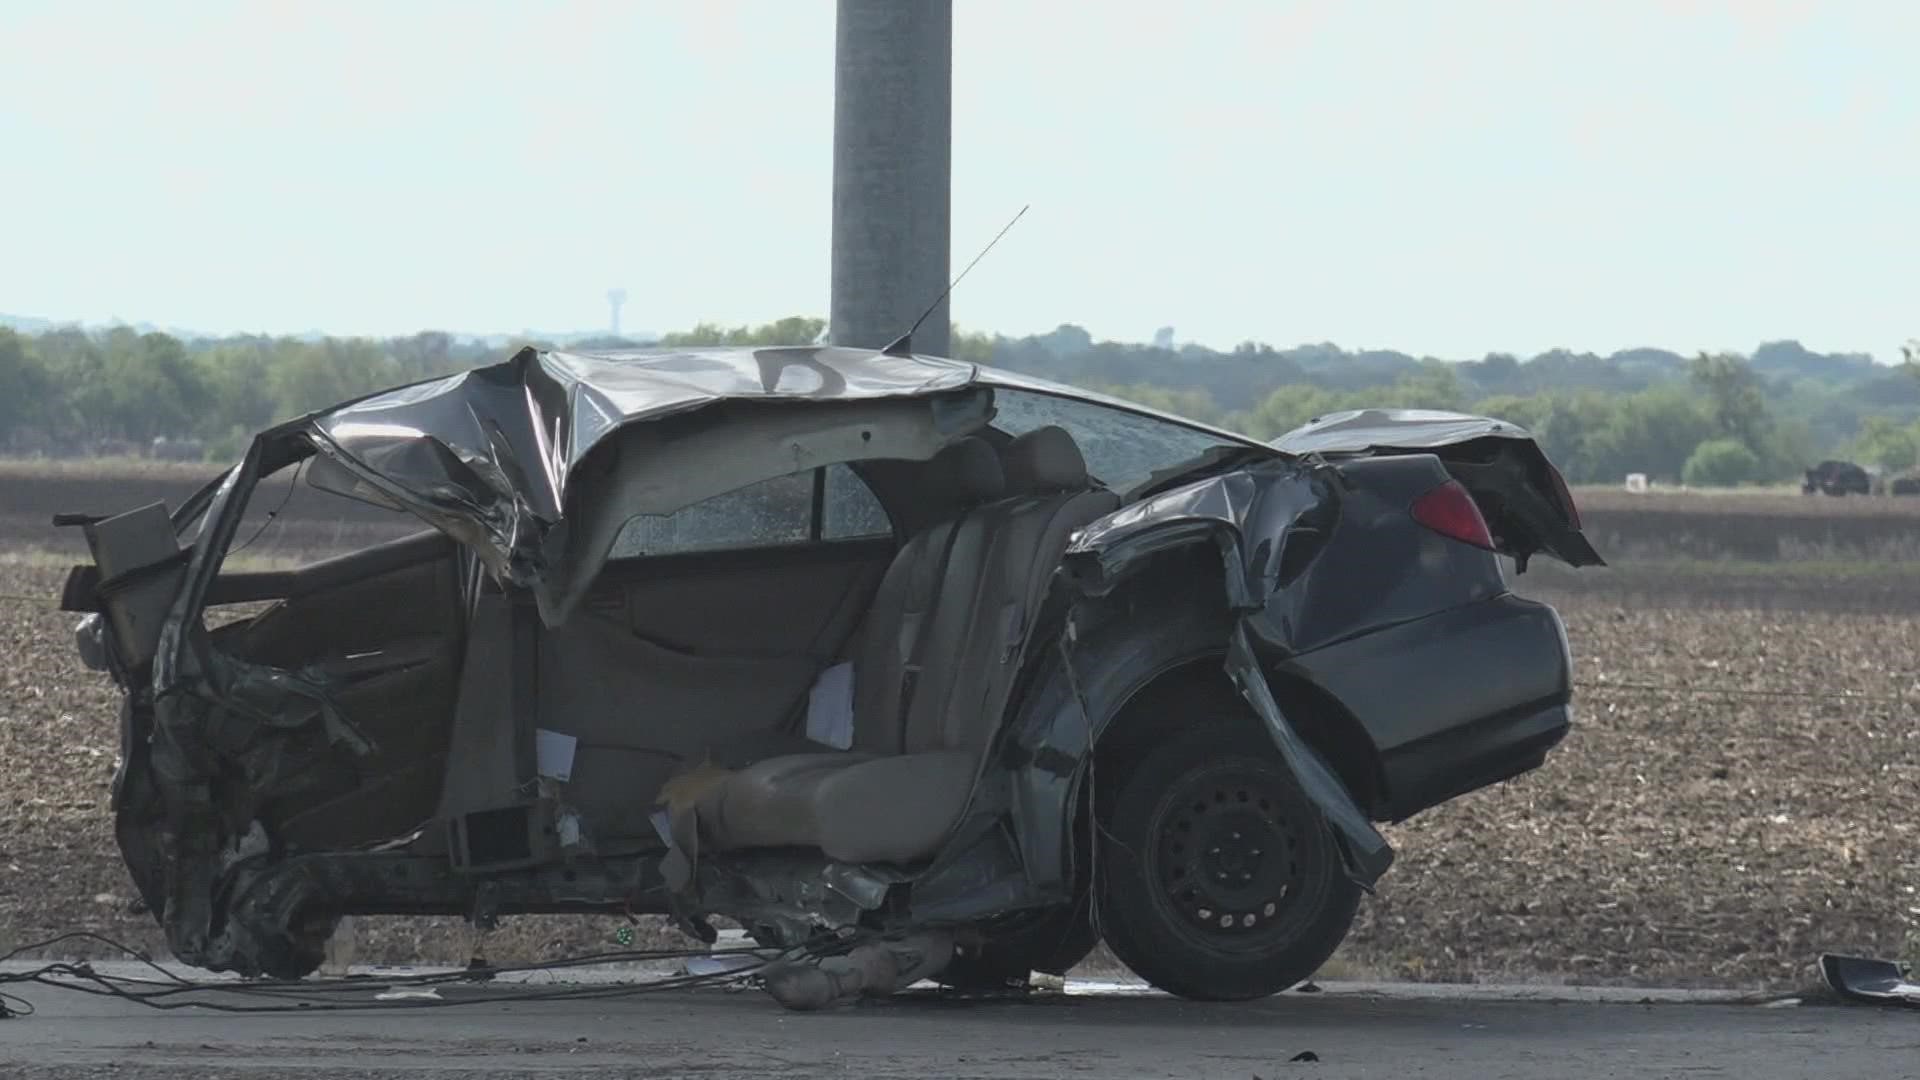 Roads in the area were closed for at least two hours as the Bexar County Sheriff's Office investigated the two-vehicle crash.